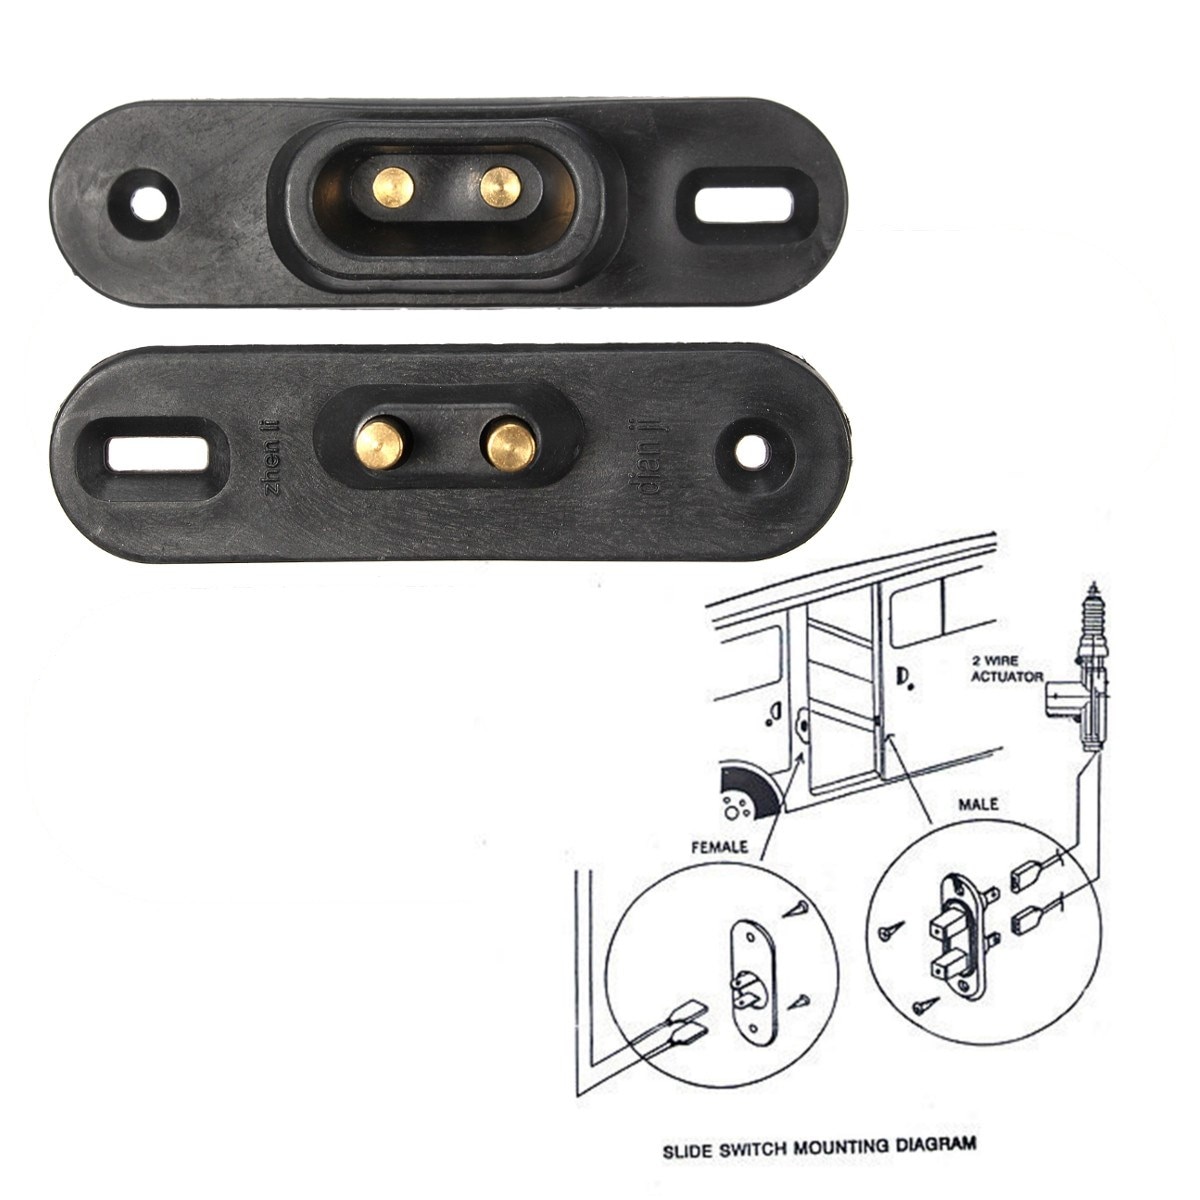 2Pcs Black Sliding Door Contact Switch Central Locking Systems Car Alarm For VW/T4/FORD Van